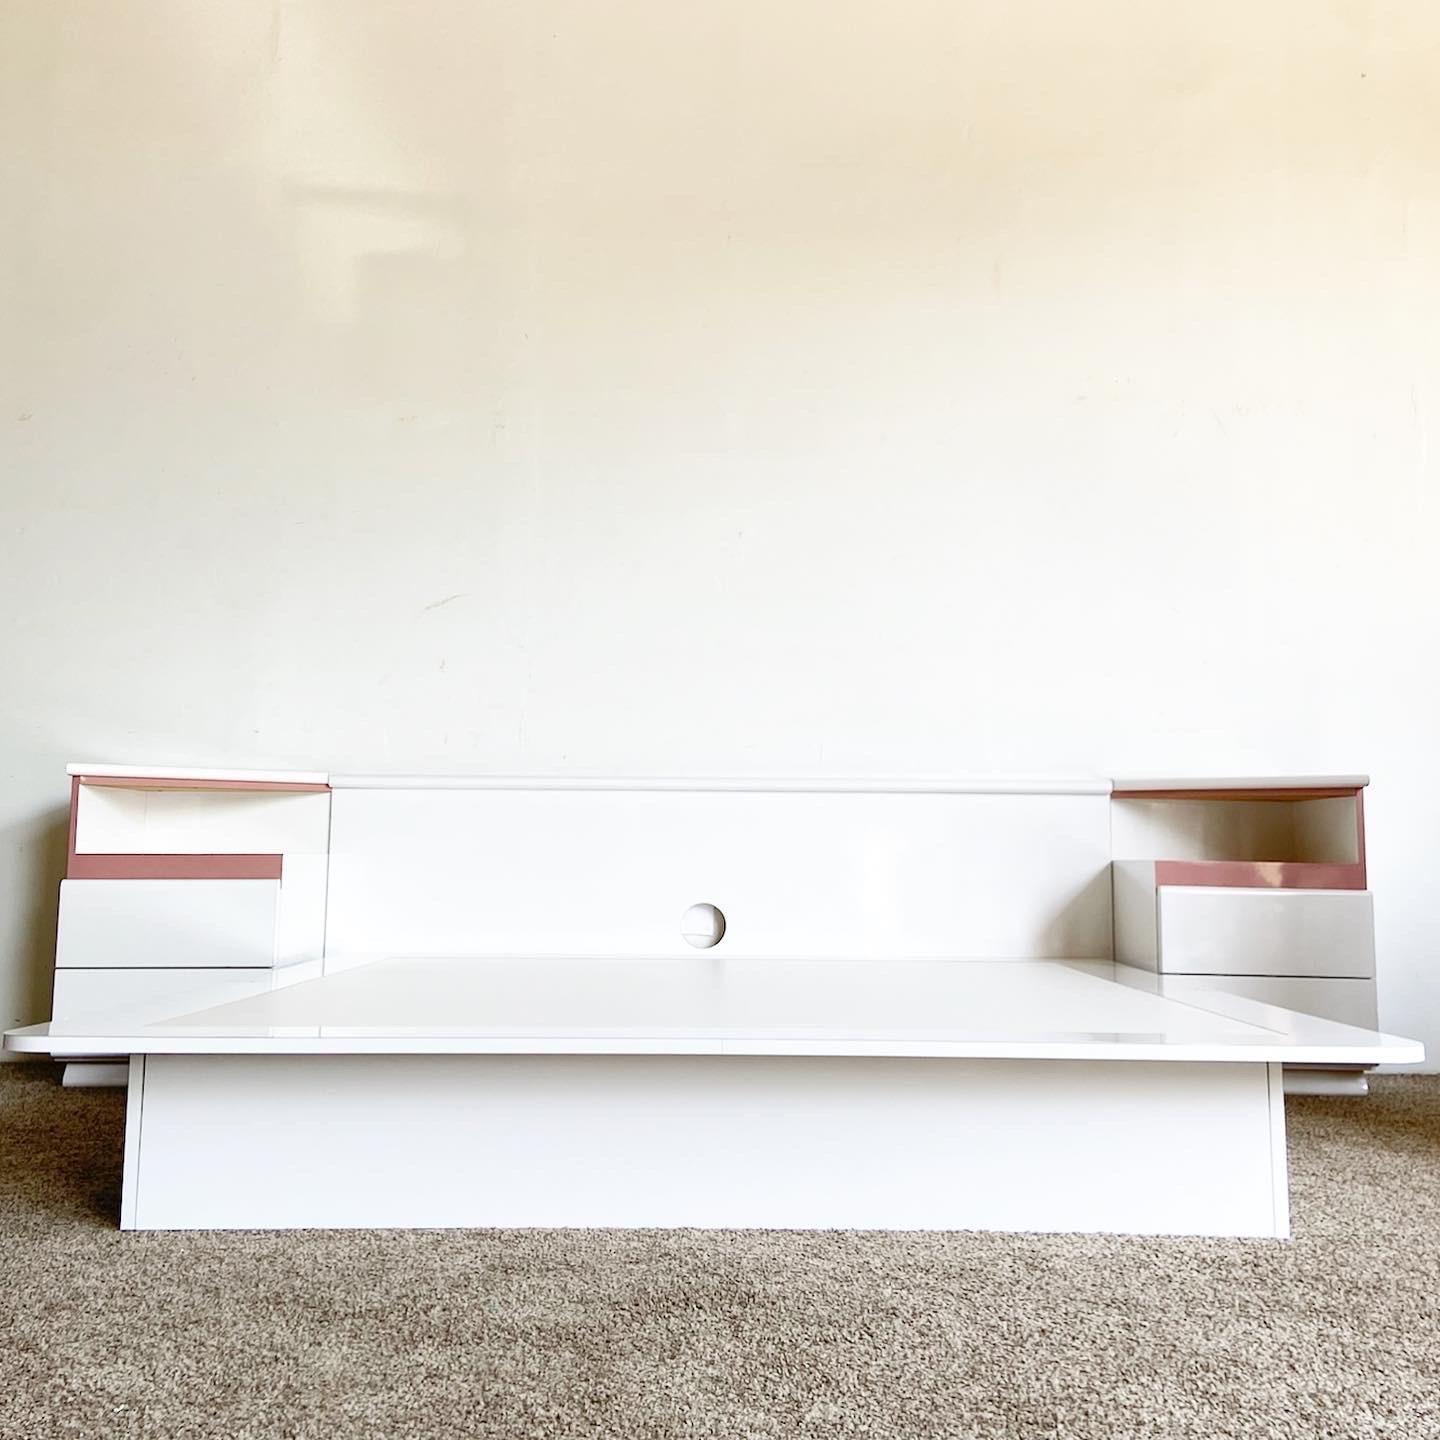 Exceptional vintage king size postmodern platform bed with triangular top nightstands. Features a white lacquer laminate with mauve pink accents.

Platform bed measures 76”W, 80.25”D, 11”H
Nightstands measure 19”W, 19.5”D, 29”H
Headboard